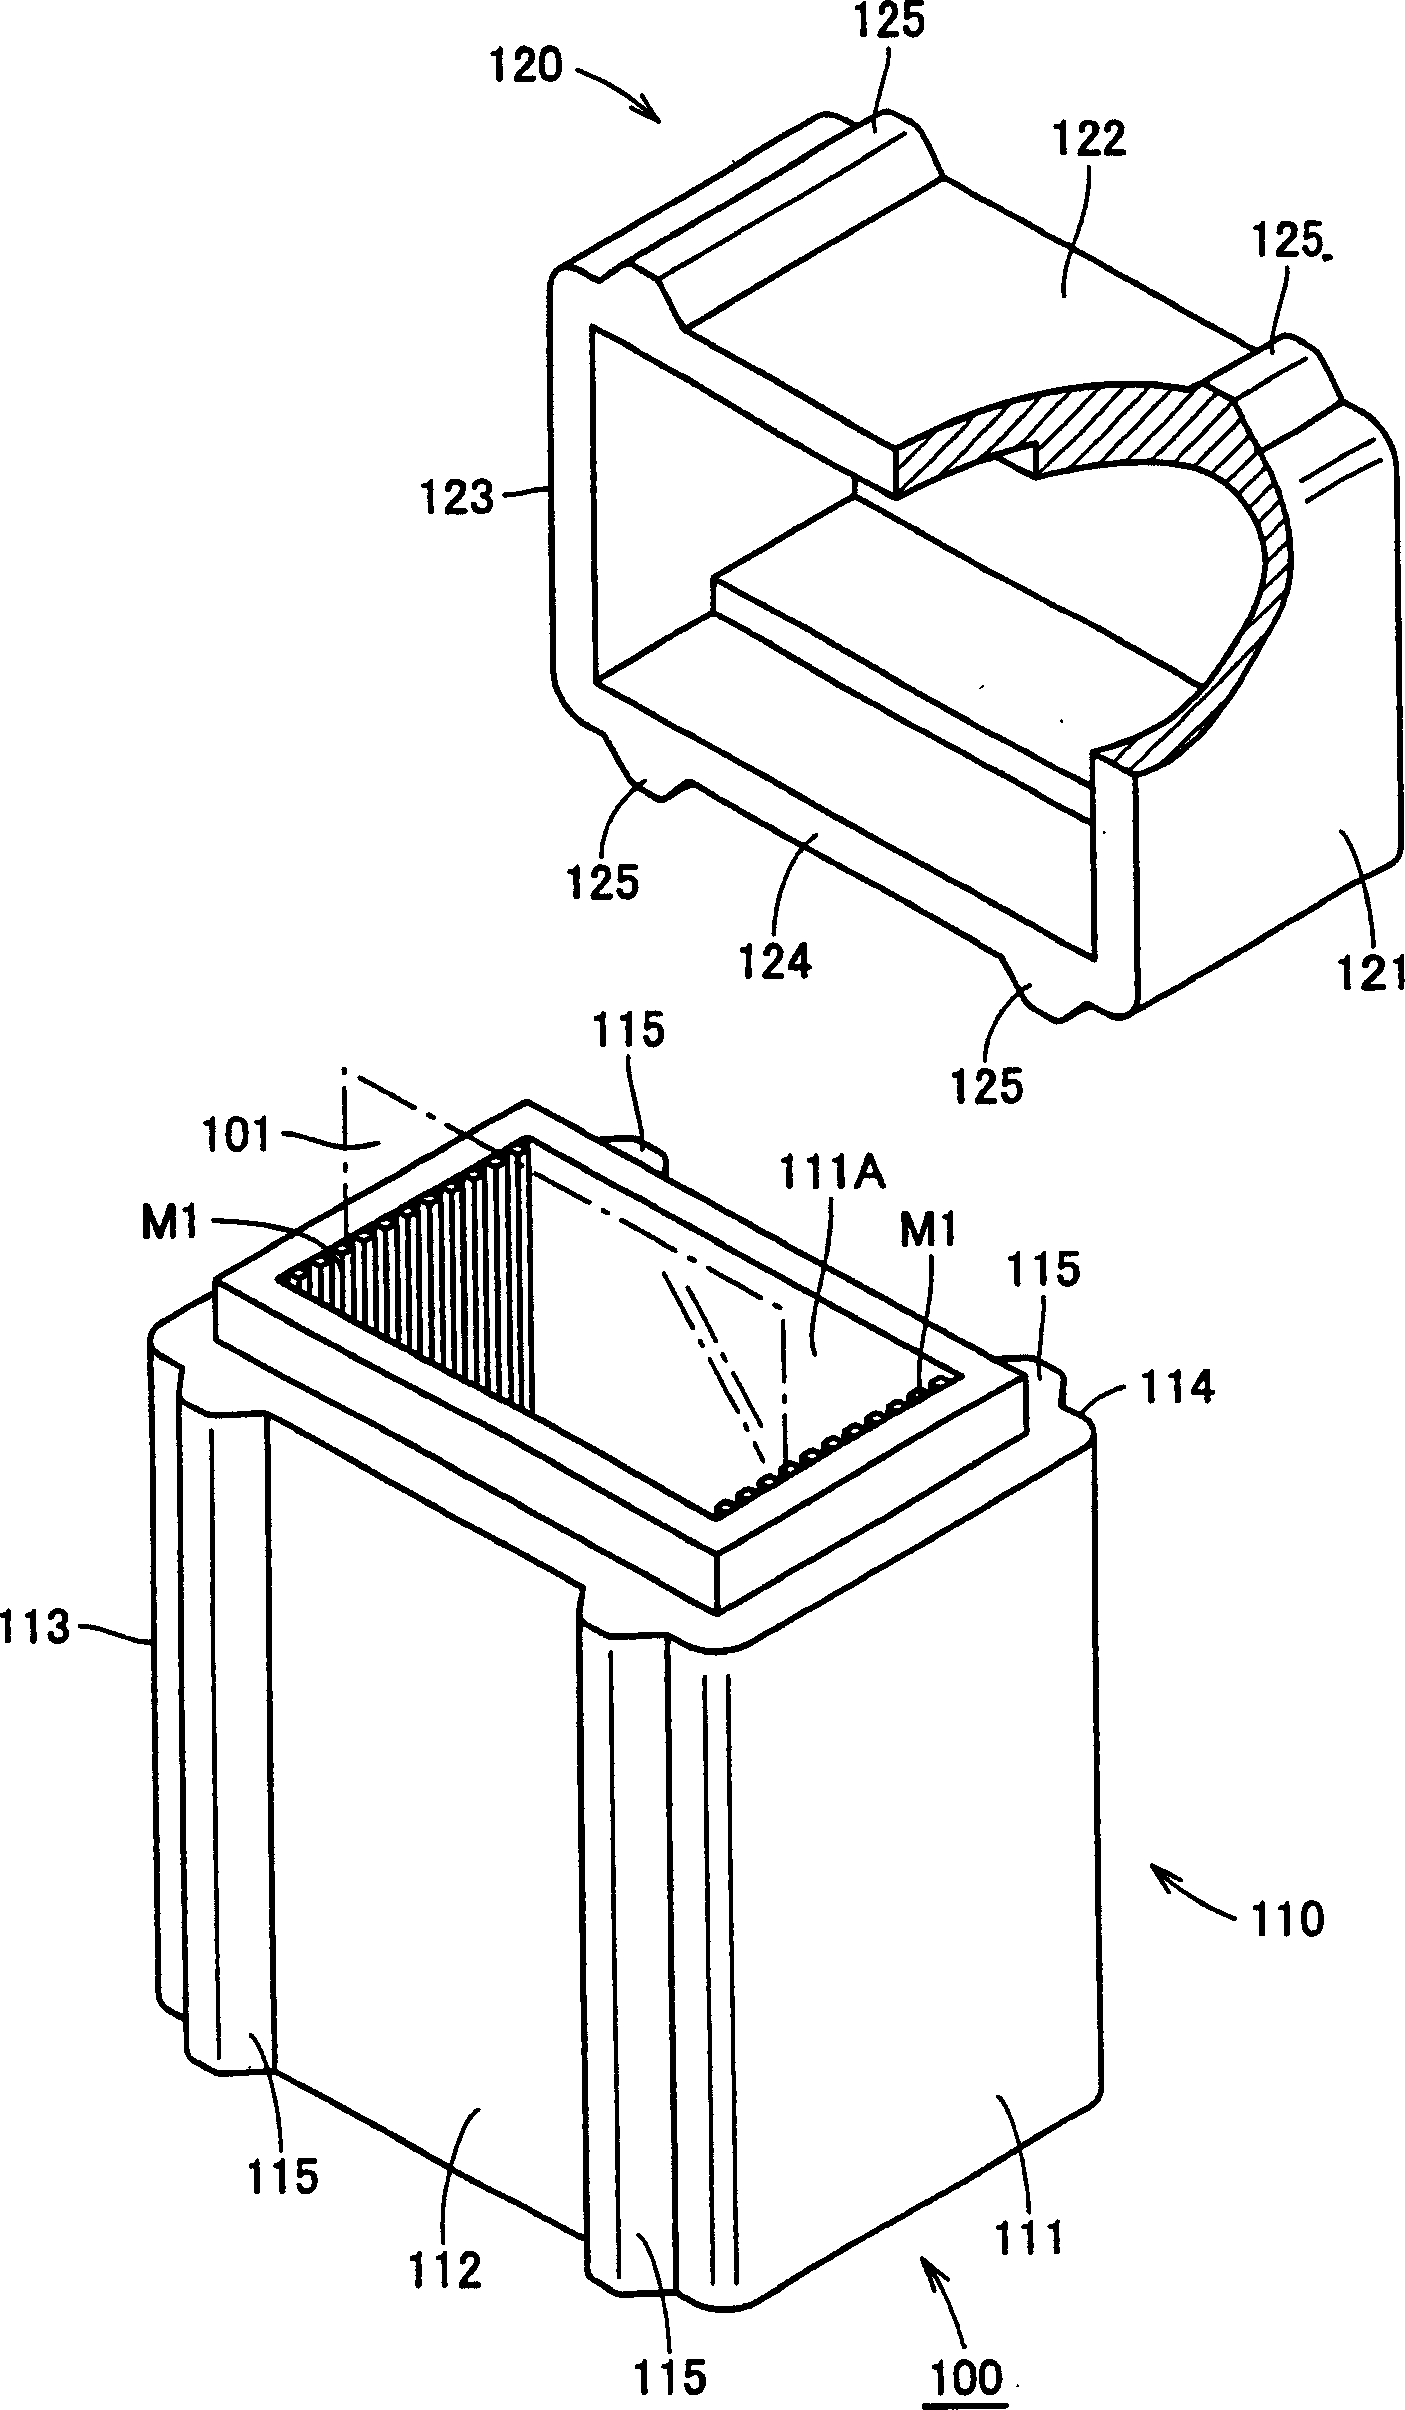 Box used for glass basal plate conveyance